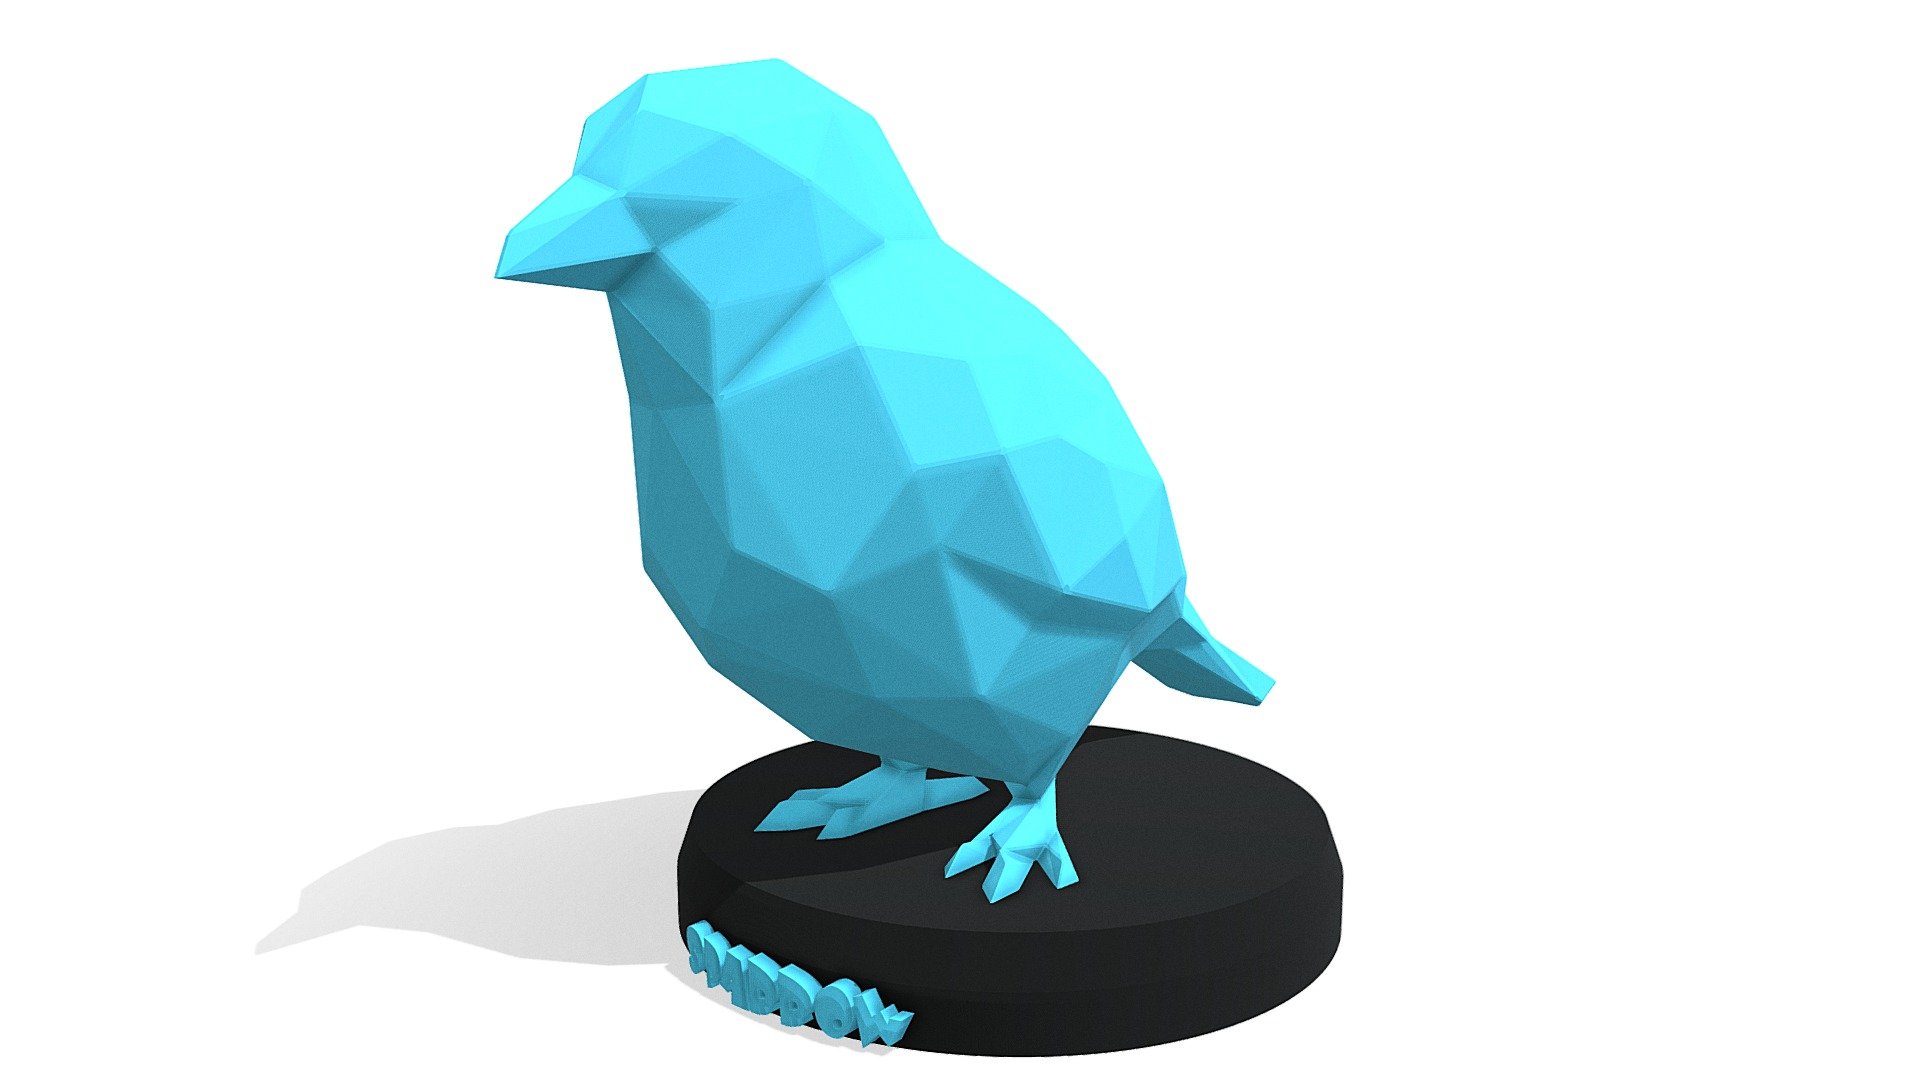 Polygonal 3D Model with Parametric modeling with gold material, make it recommend for :




Basic modeling 

Rigging 

sculpting 

Become Statue

Decorate

3D Print File

Toy

Have fun  :) - Poly Sparrow - Buy Royalty Free 3D model by Puppy3D 3d model